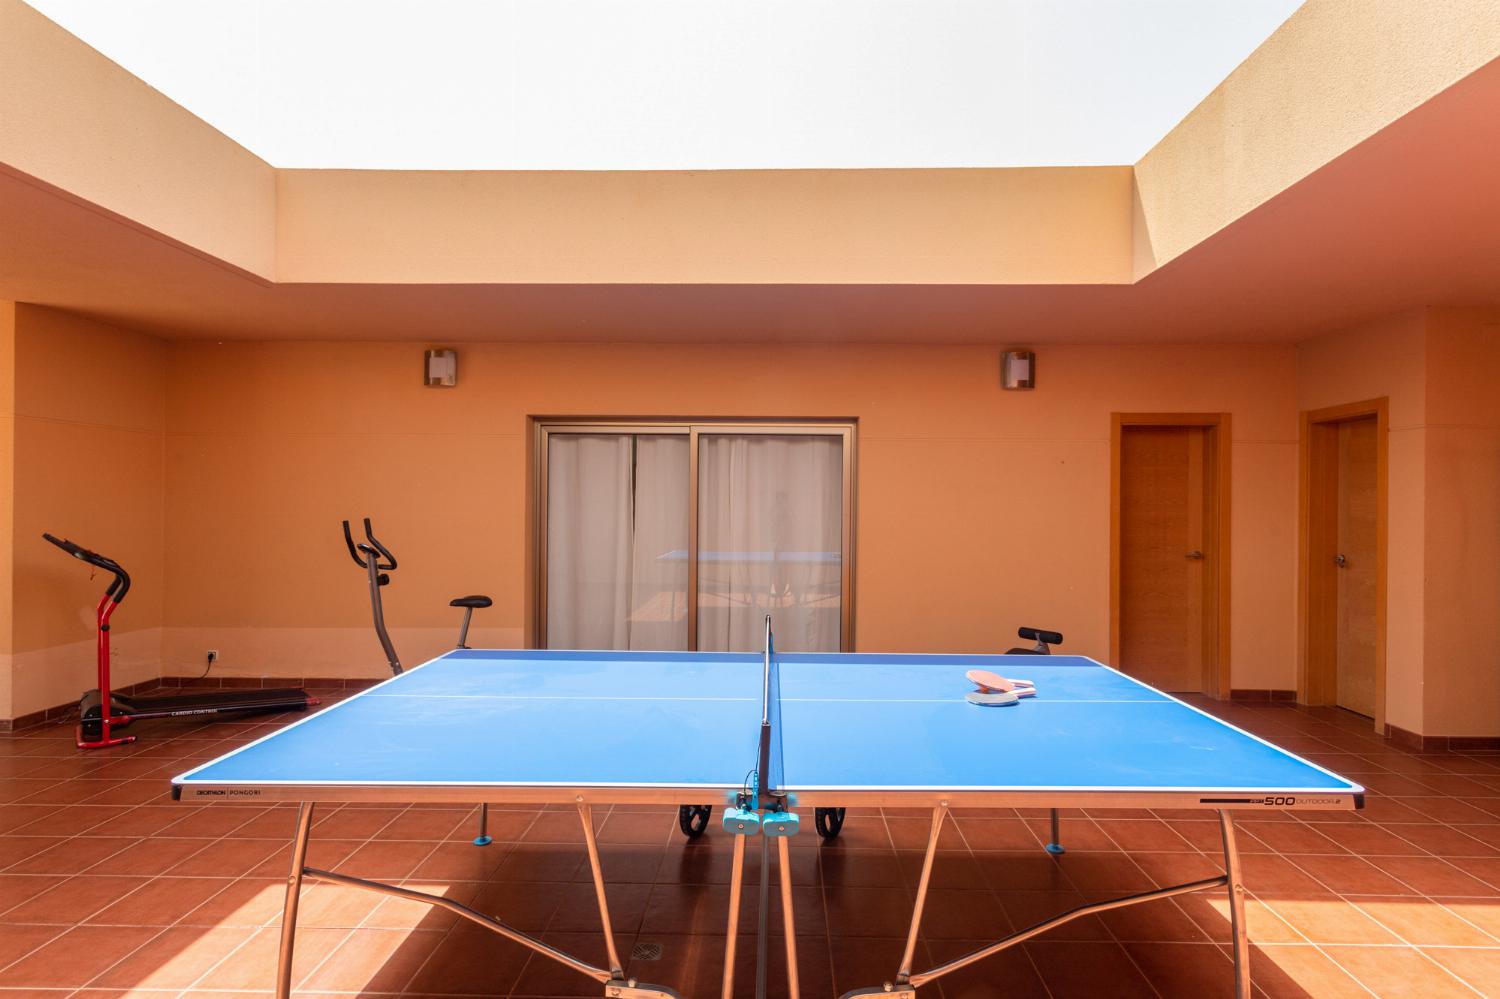 Ping pong table and gym area